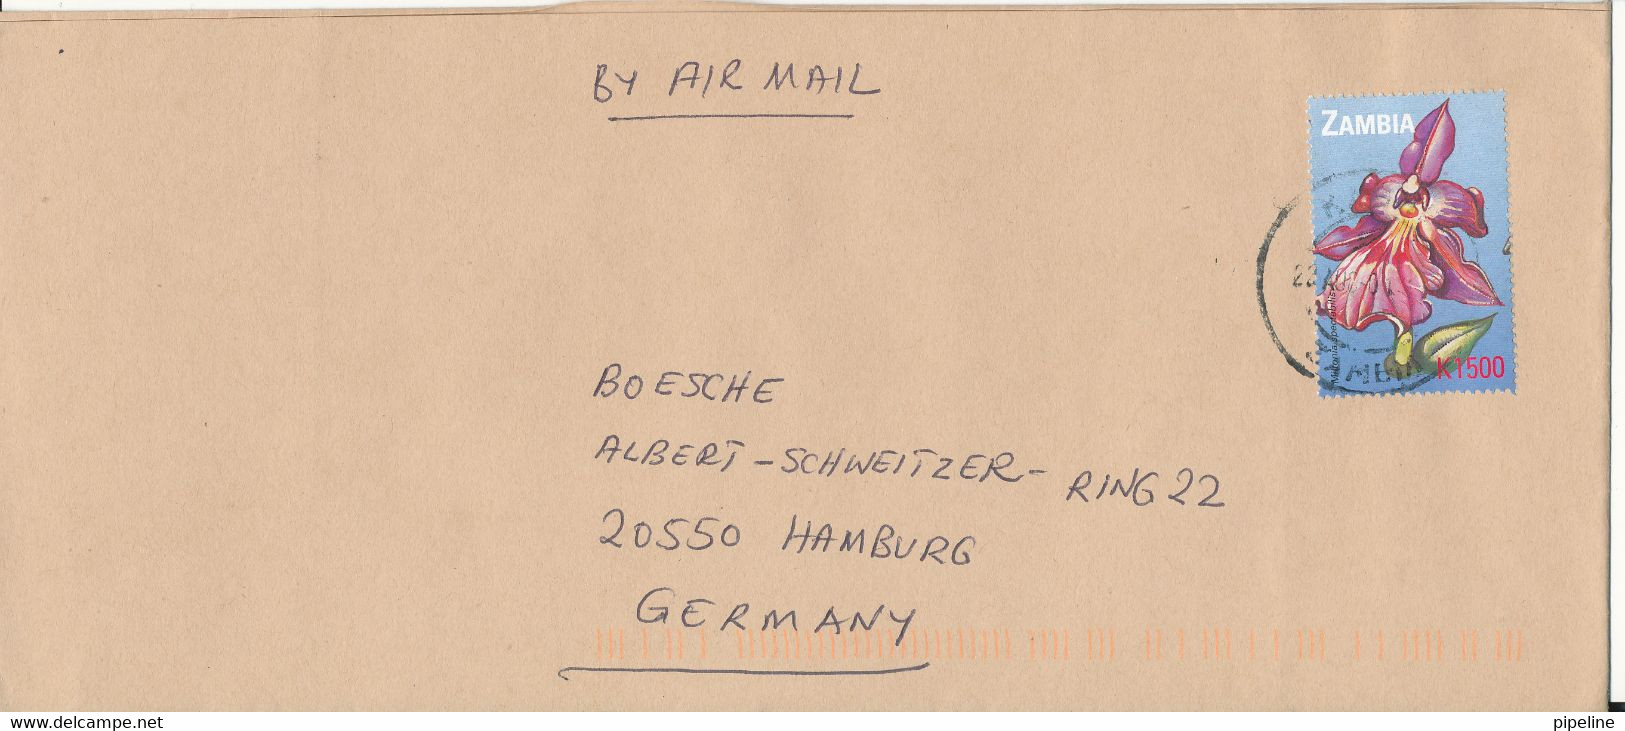 Zambia Cover Sent Air Mail To Germany 22-8-2001 Single Franked FLOWER - Zambia (1965-...)